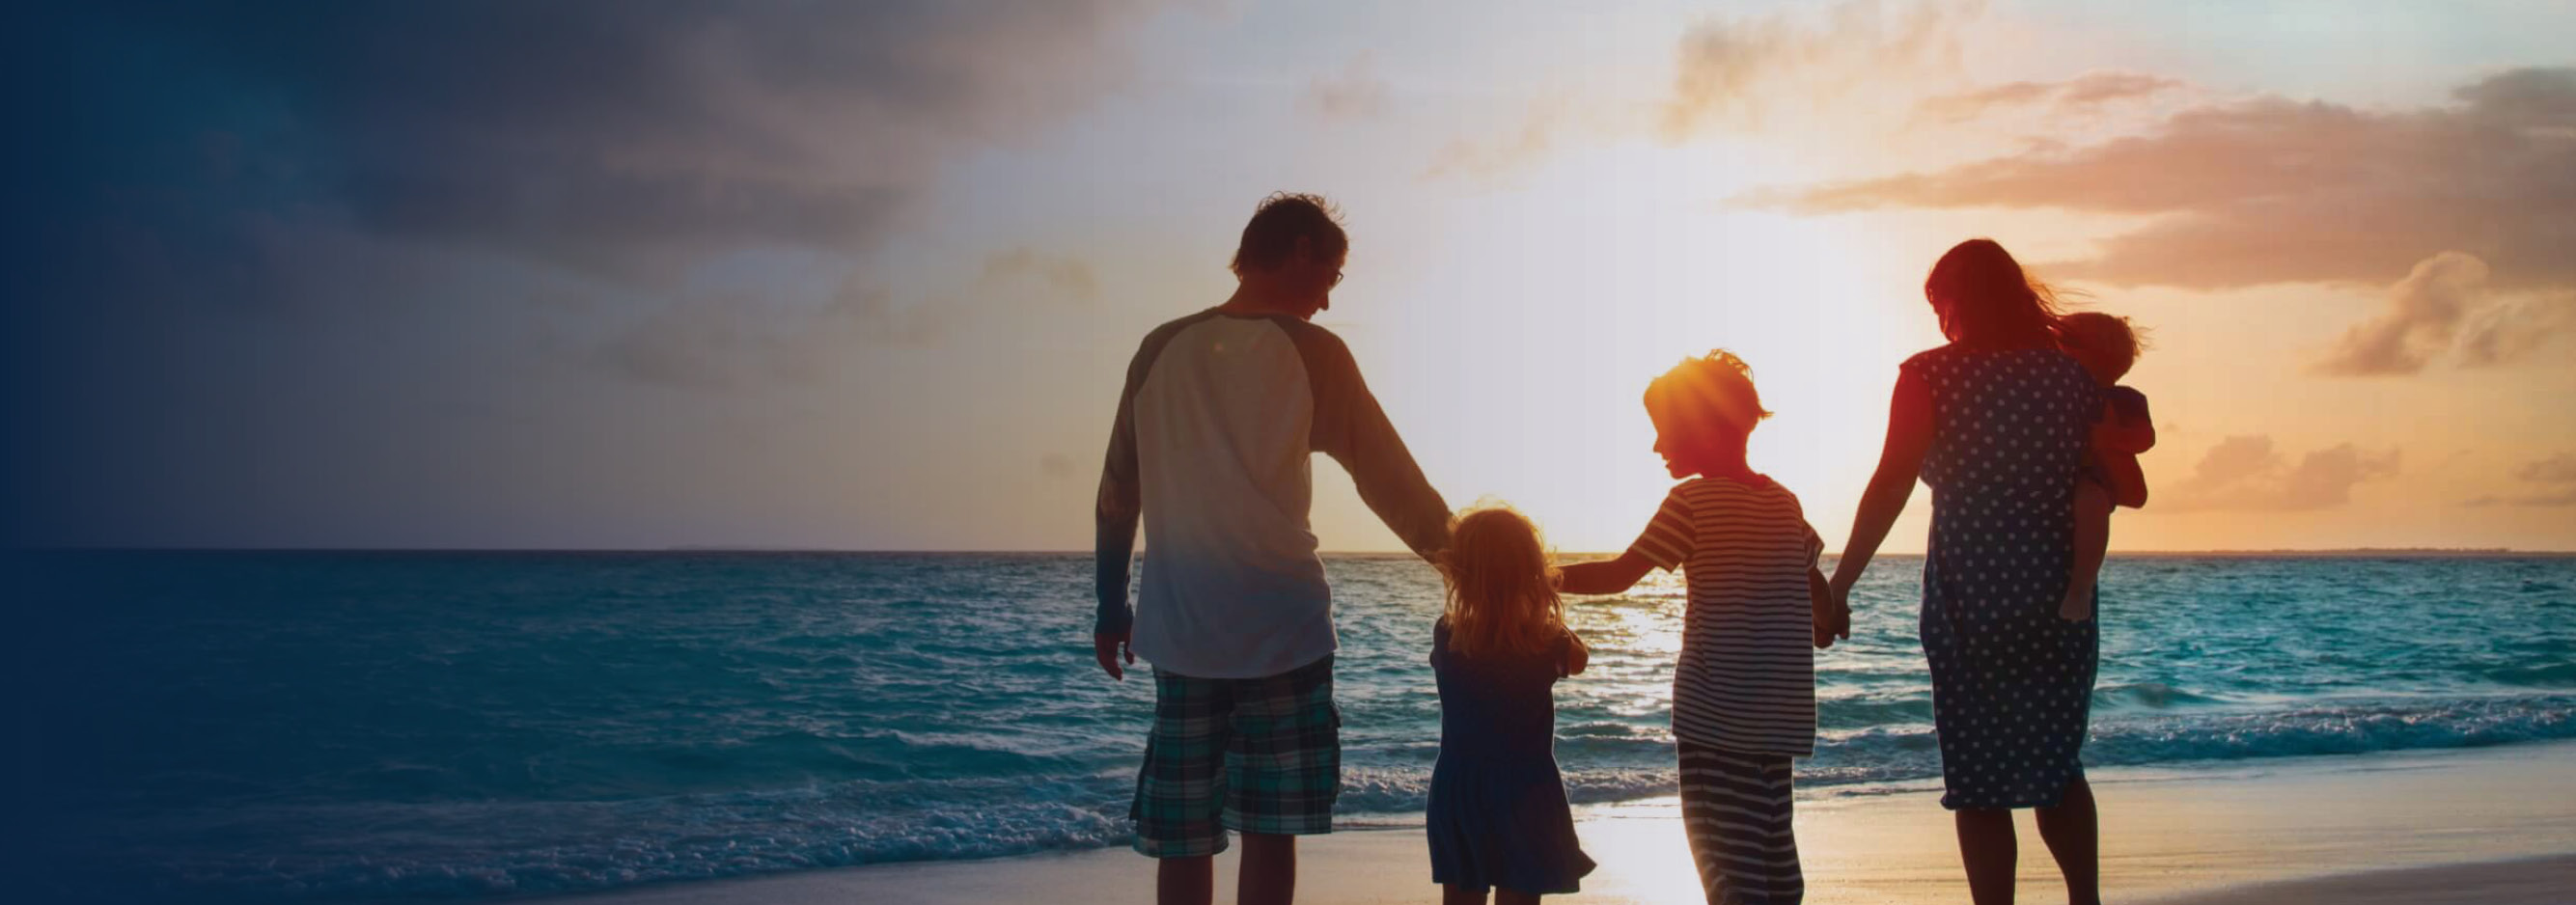 Family standing at the shoreline of the ocean at sunset.